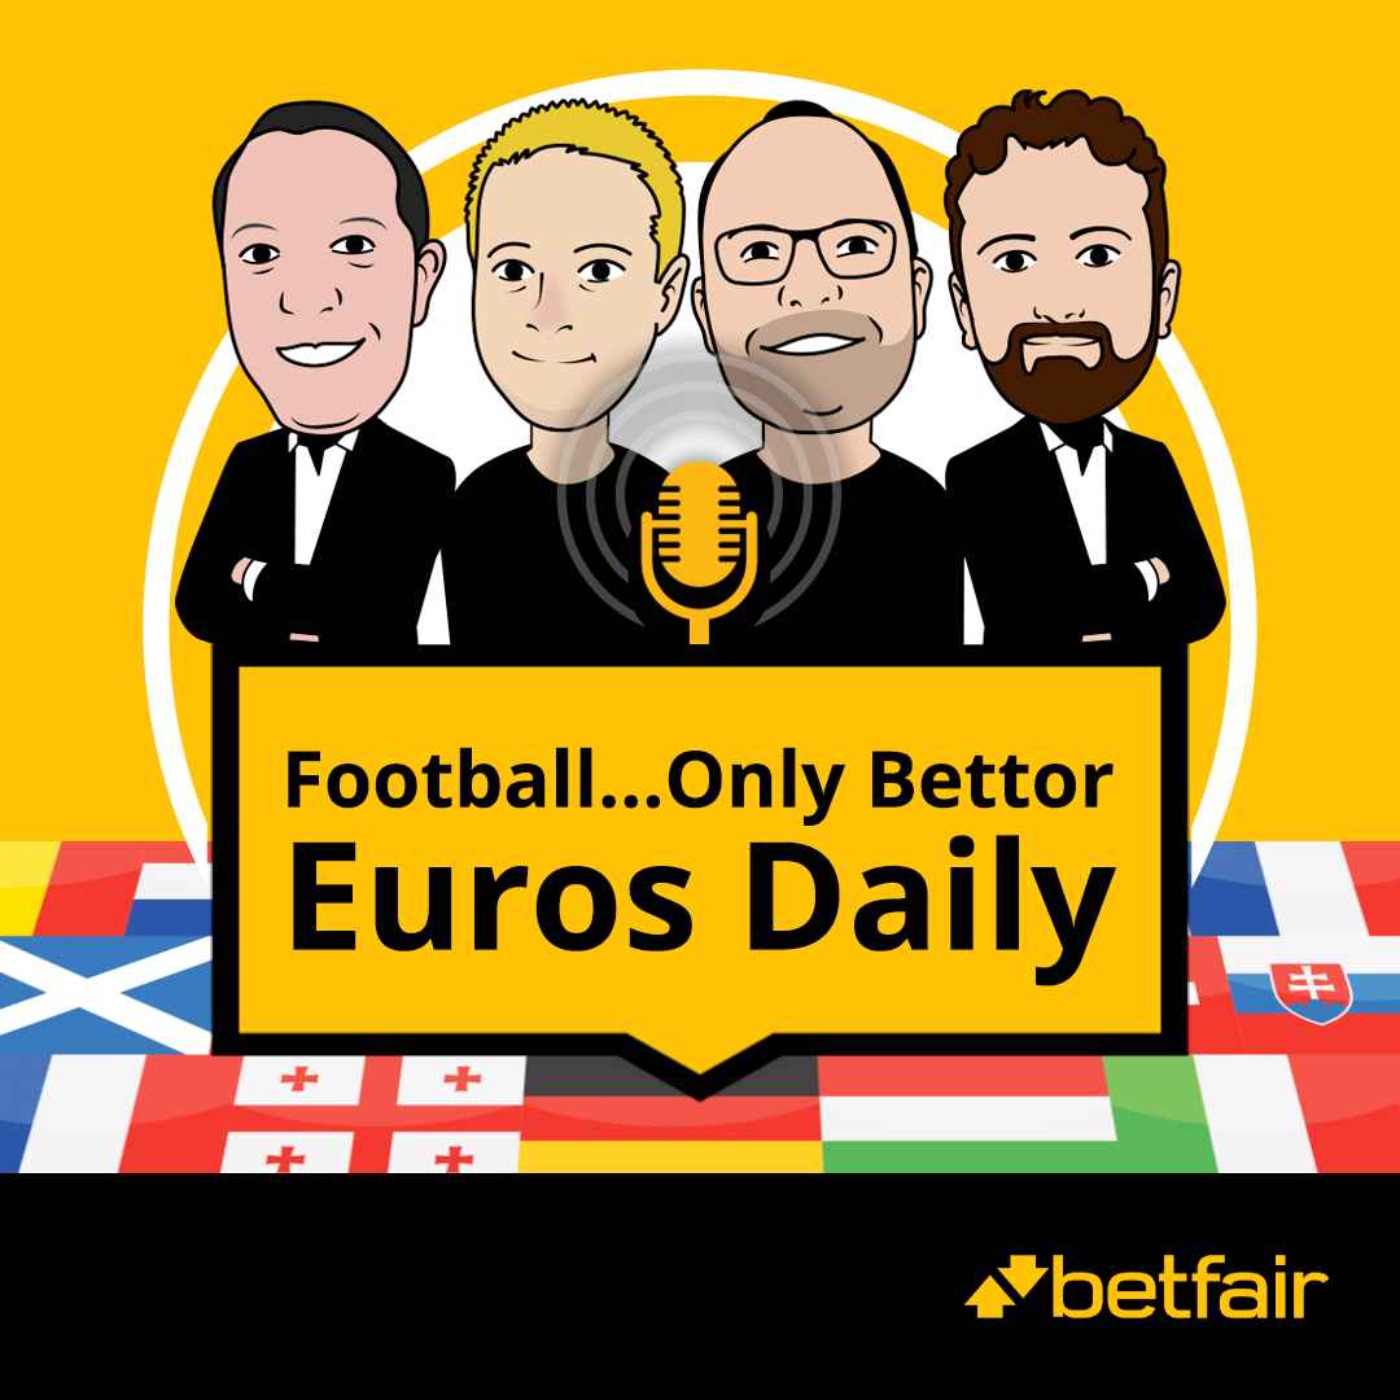 France bore draw, Austria a potential outsider? Plus Saturday tips | Football…Only Bettor: Euros Daily